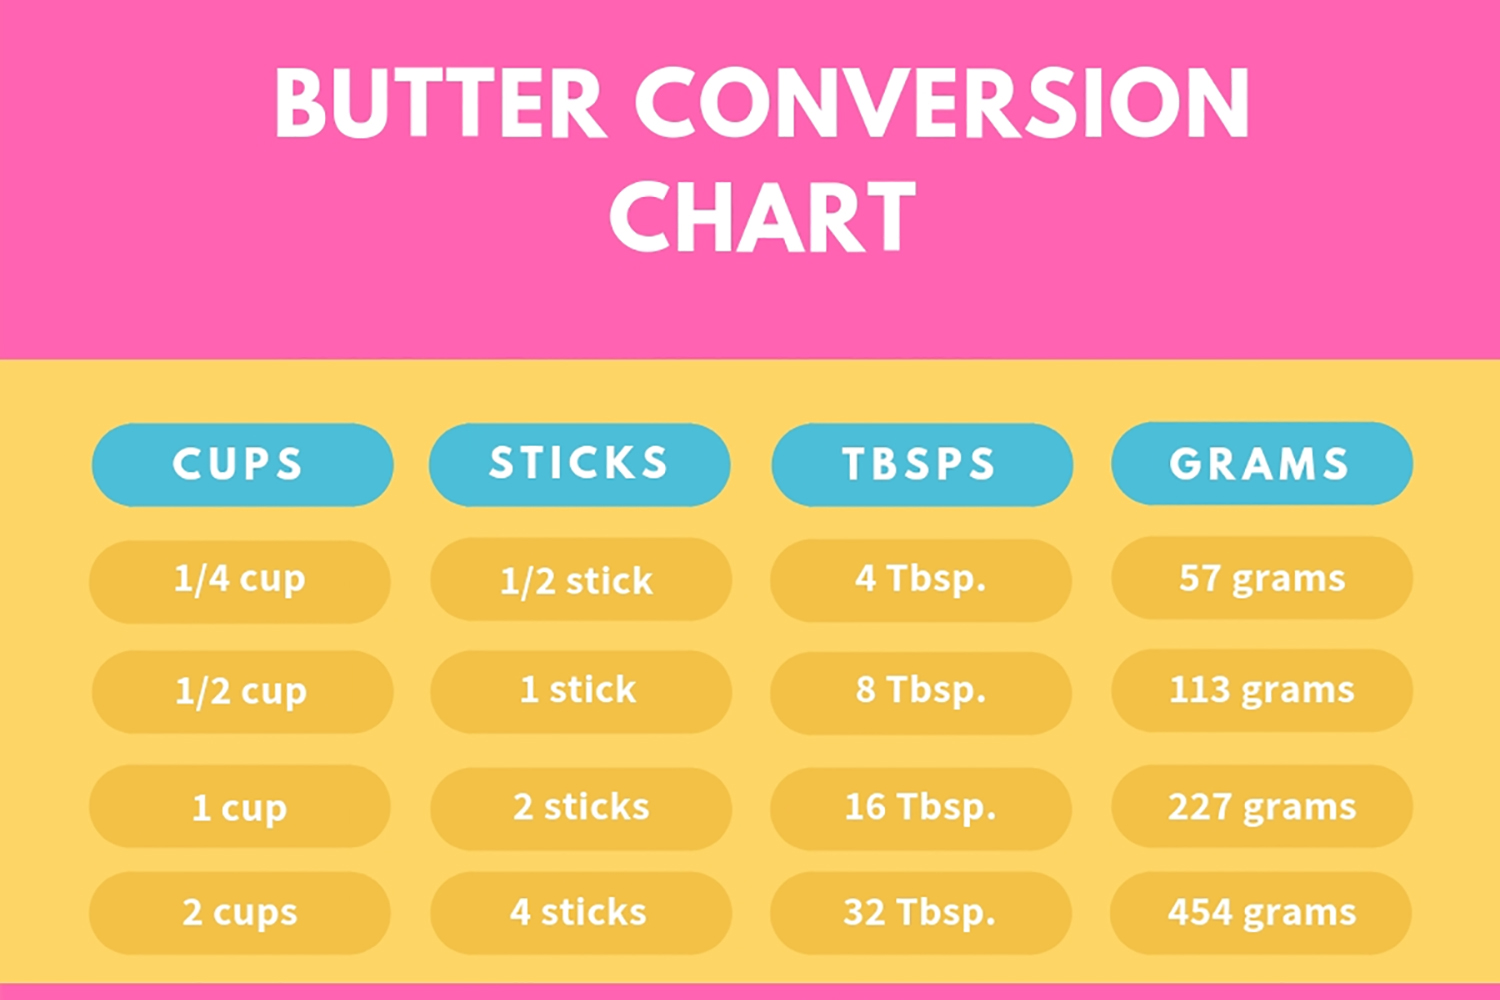 6 tablespoons butter to g